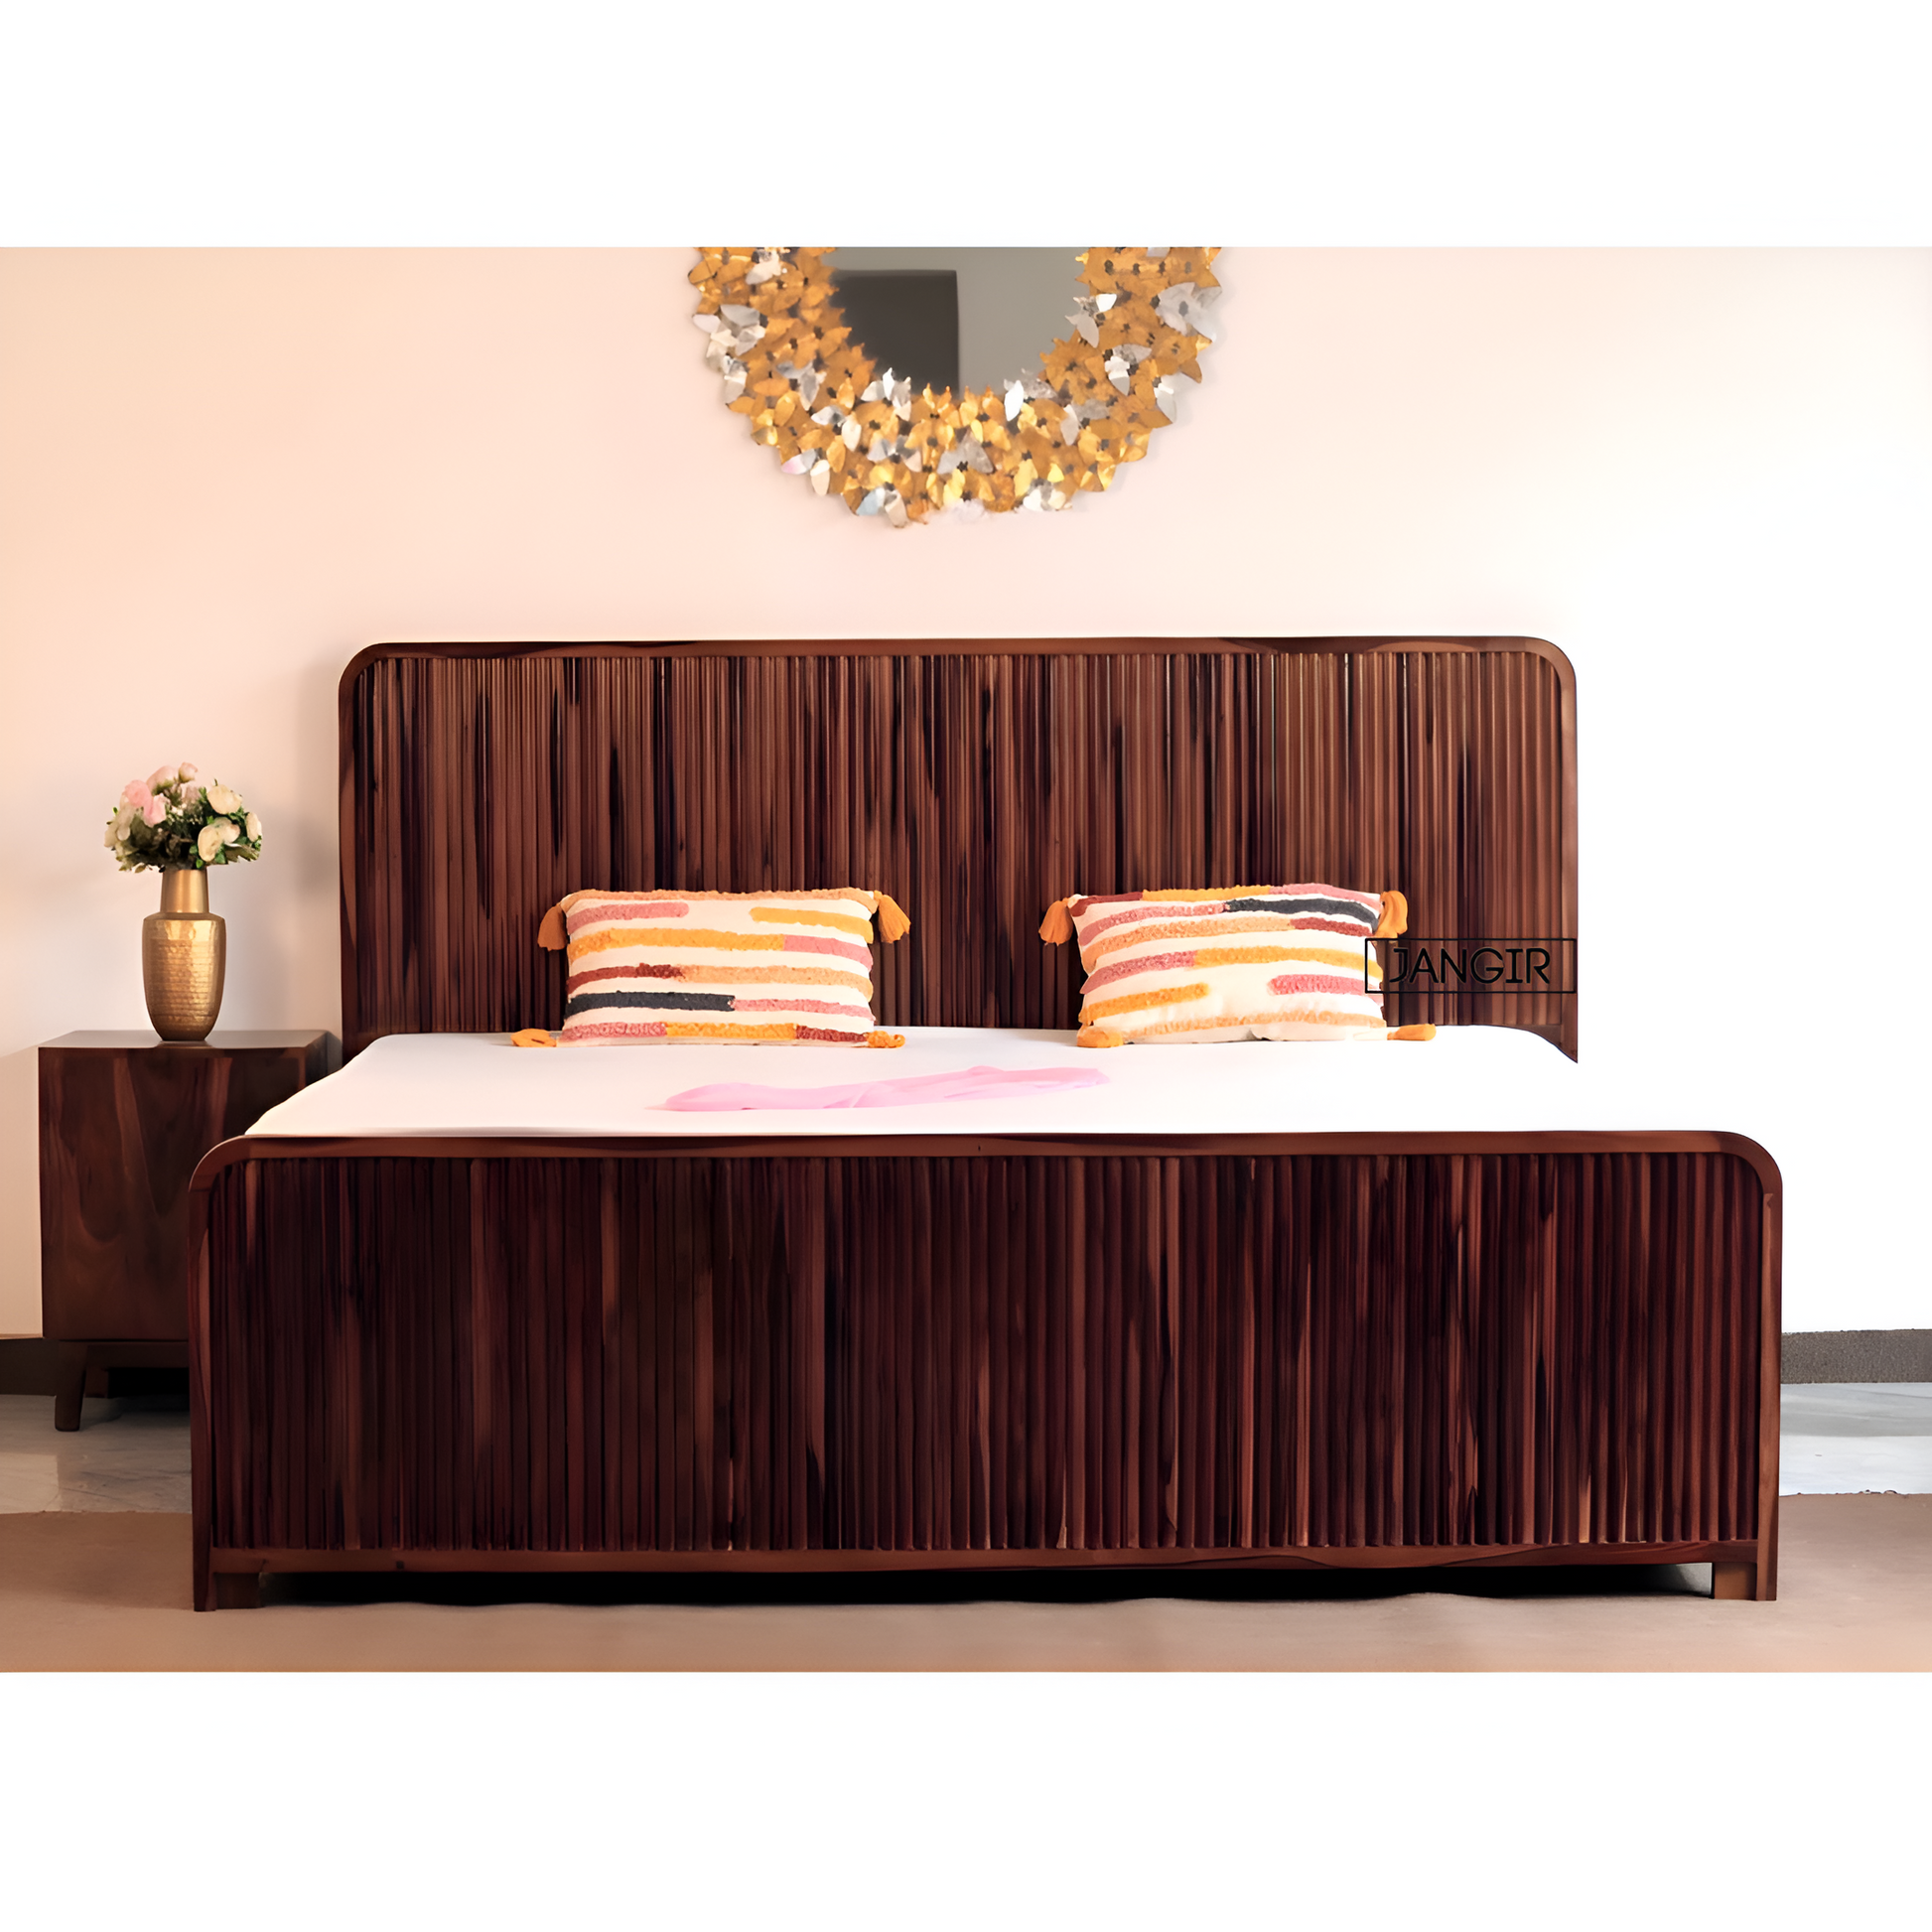 Upgrade your bedroom with our stylish and designer bed made from durable sheesham wood. Explore our range of king size and queen size storage beds online or near you in Bangalore today